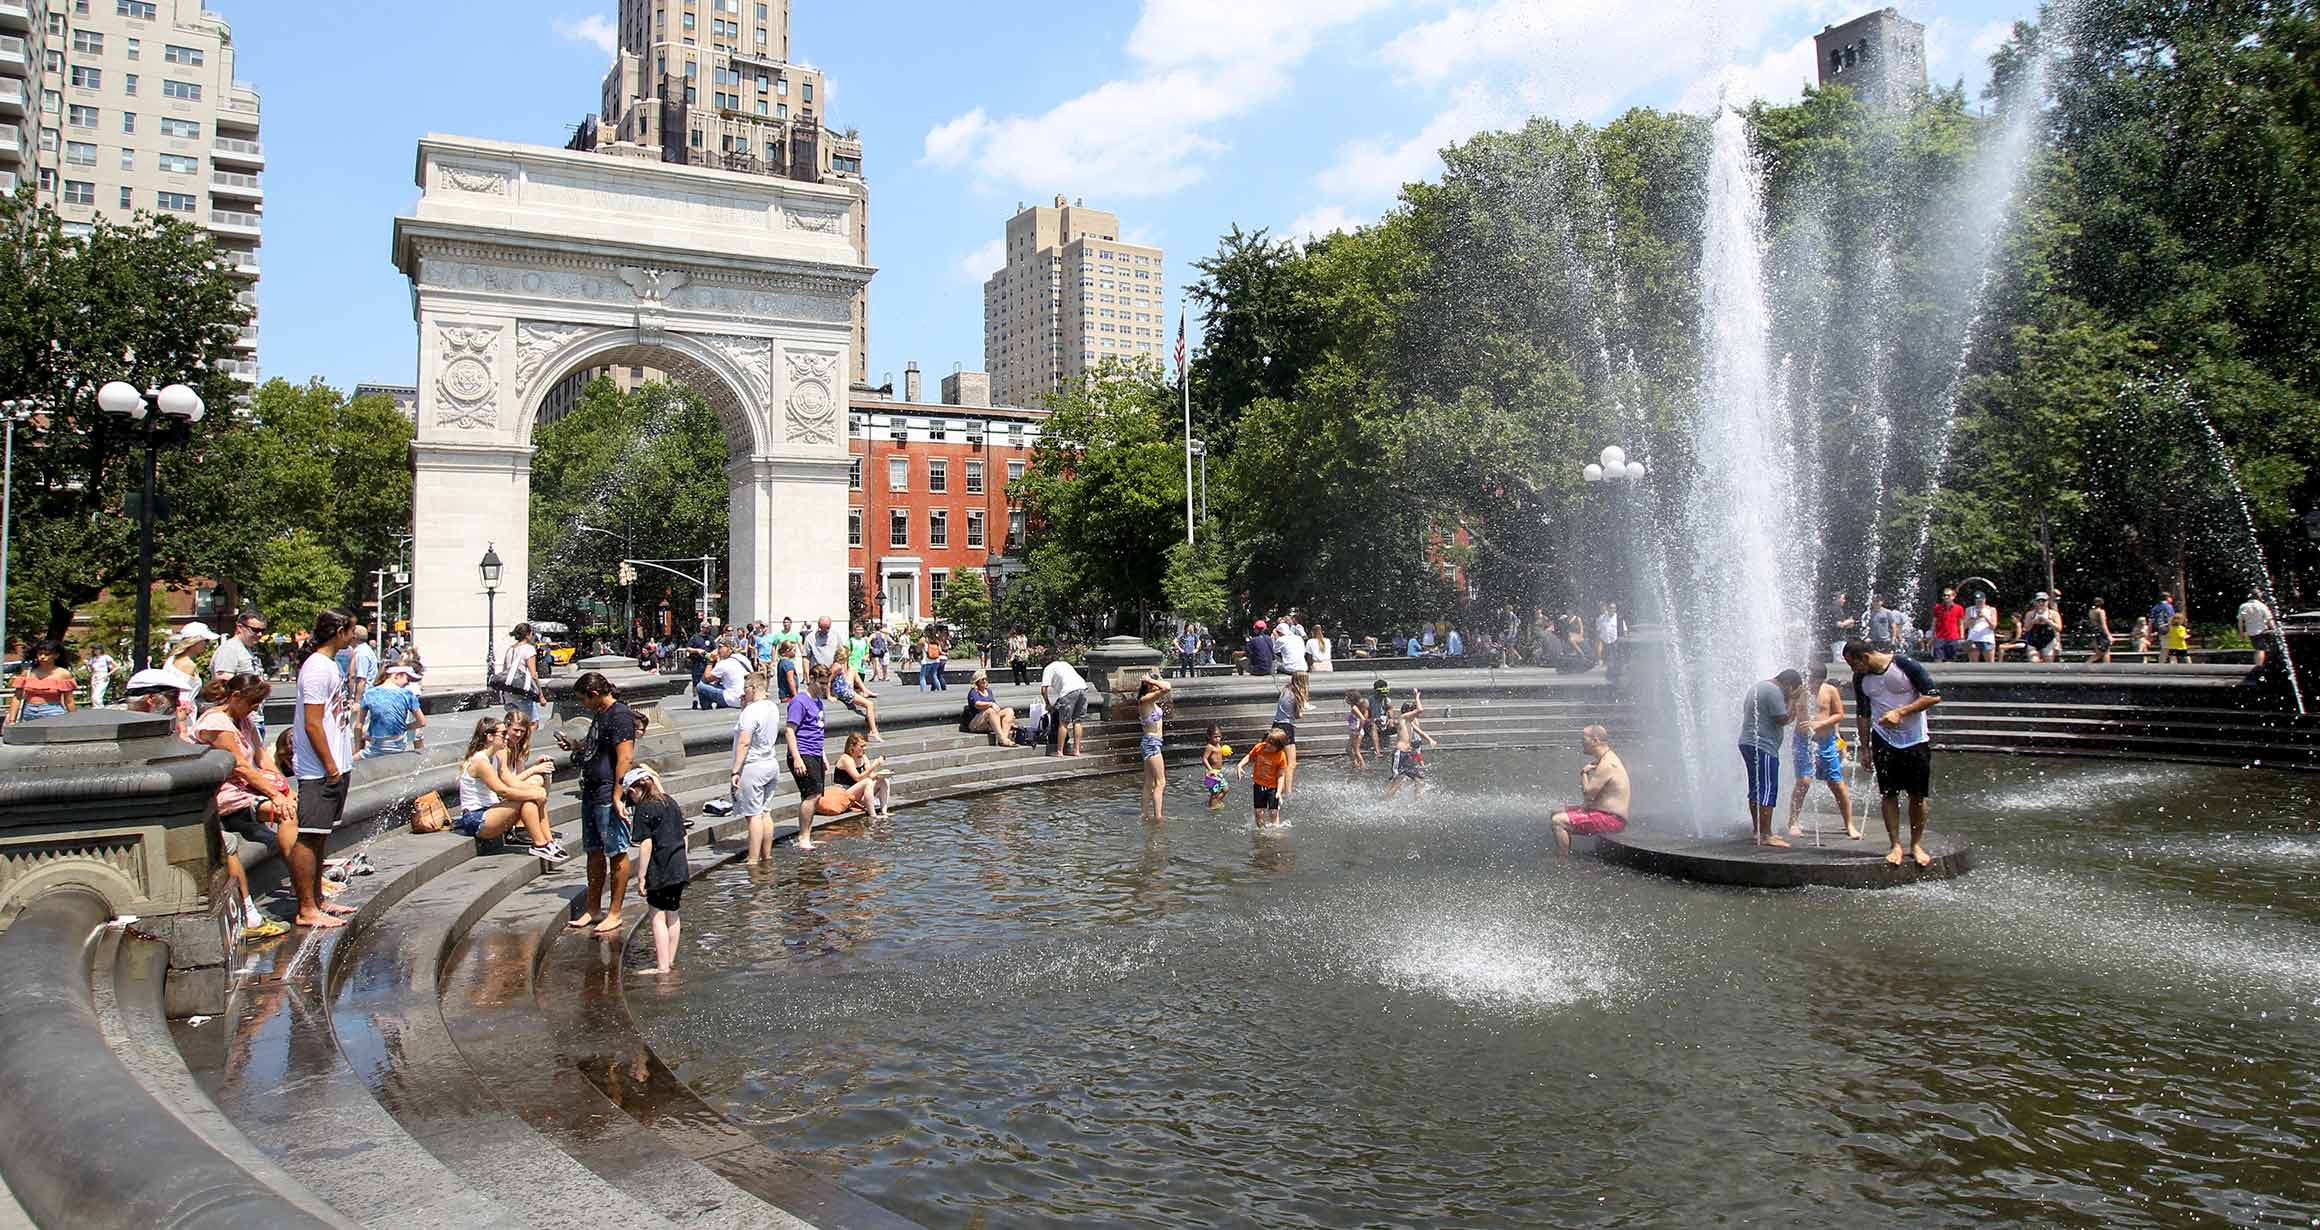 The fountain is Washington Square Park sprays patron as they play in the fountain